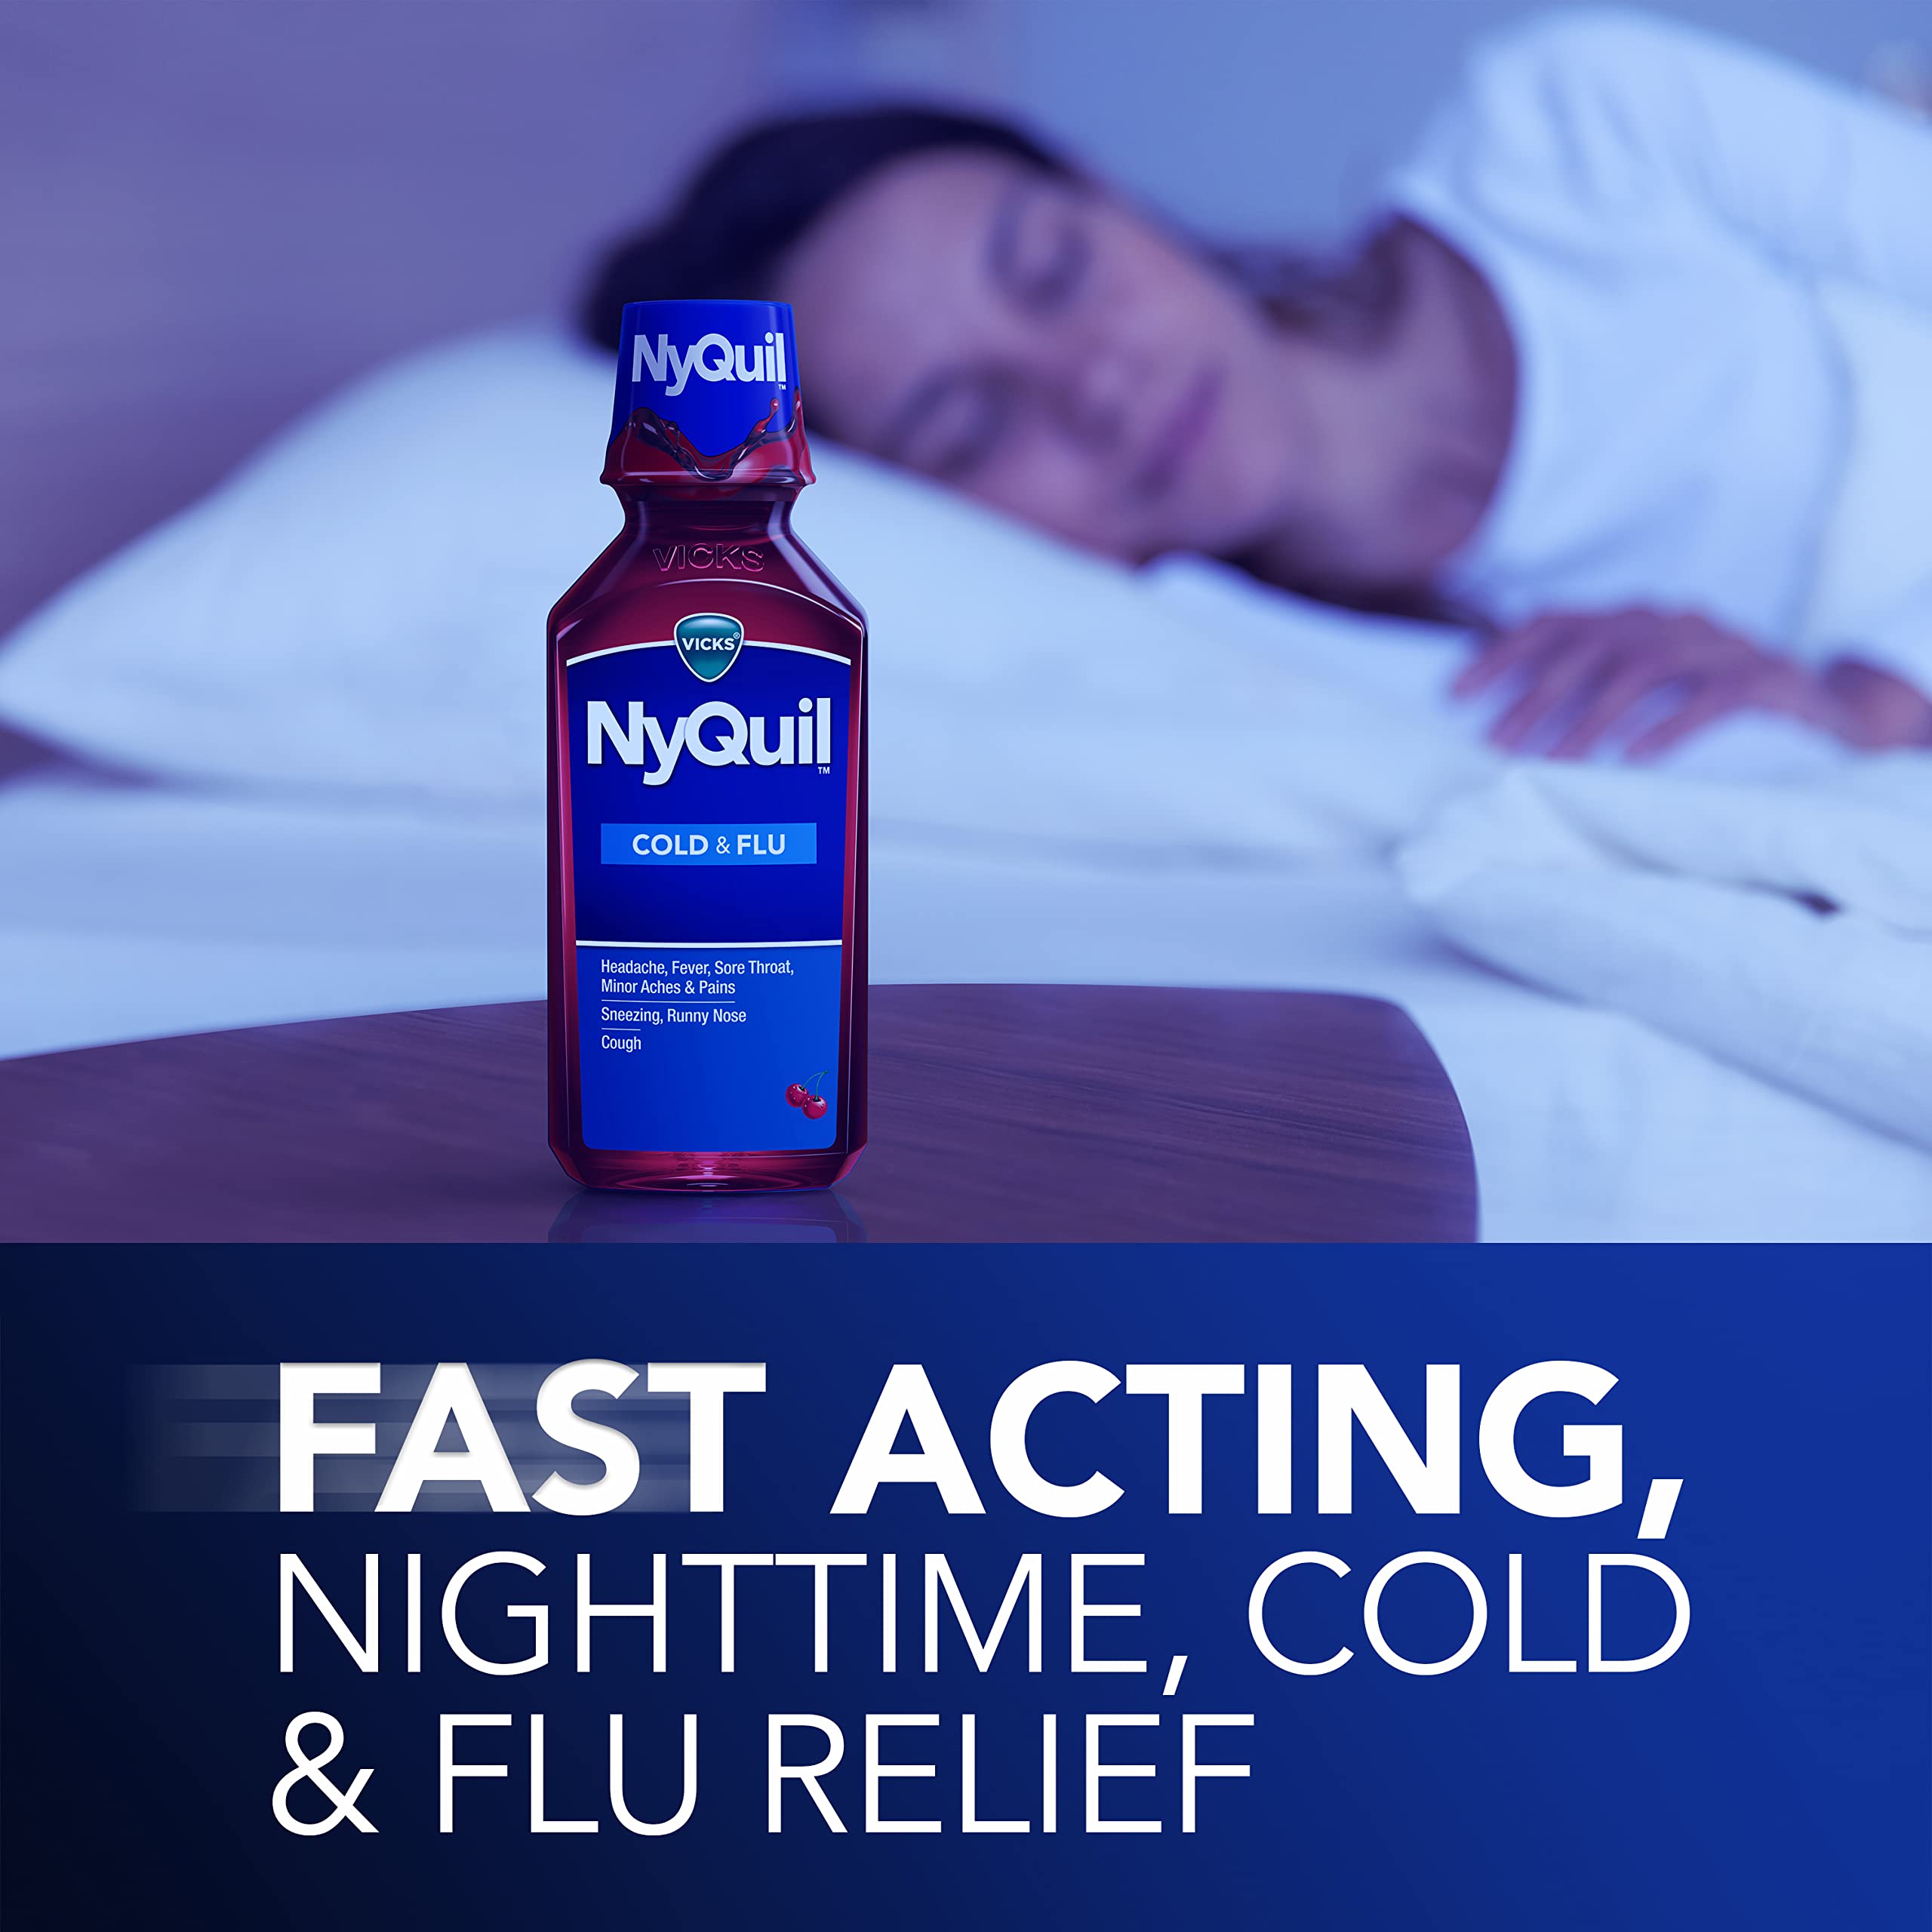 Vicks NyQuil Cough Nighttime Relief, 8 Fl Oz, Cherry Flavor - Relieves Sore Throat, Runny Nose, Cough (Pack of 3)